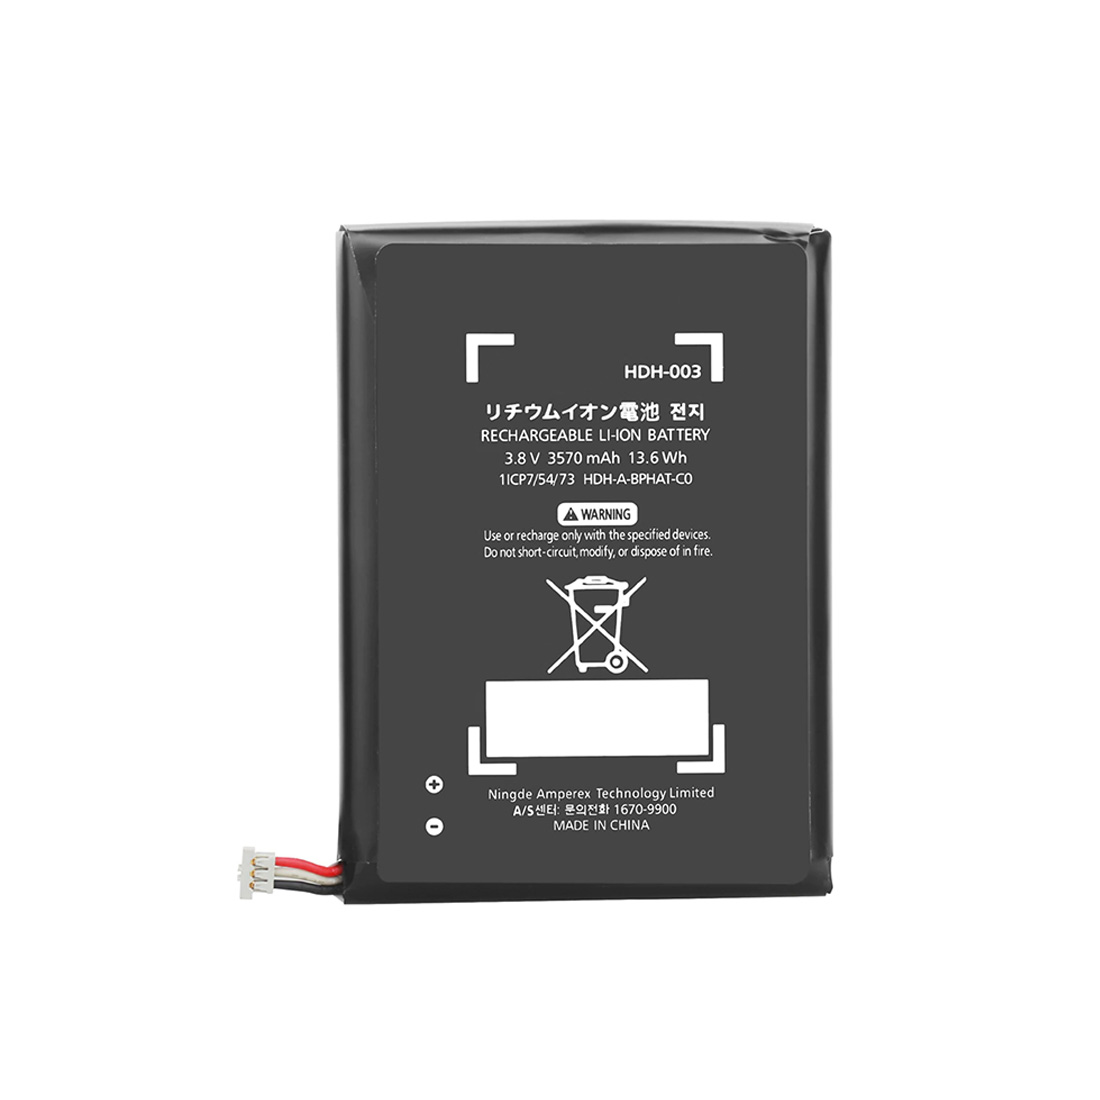 New Battery 3.8V 3570mAh 13.6Wh HDH-003 HDH003 Battery for Compatible with  Switch Lite